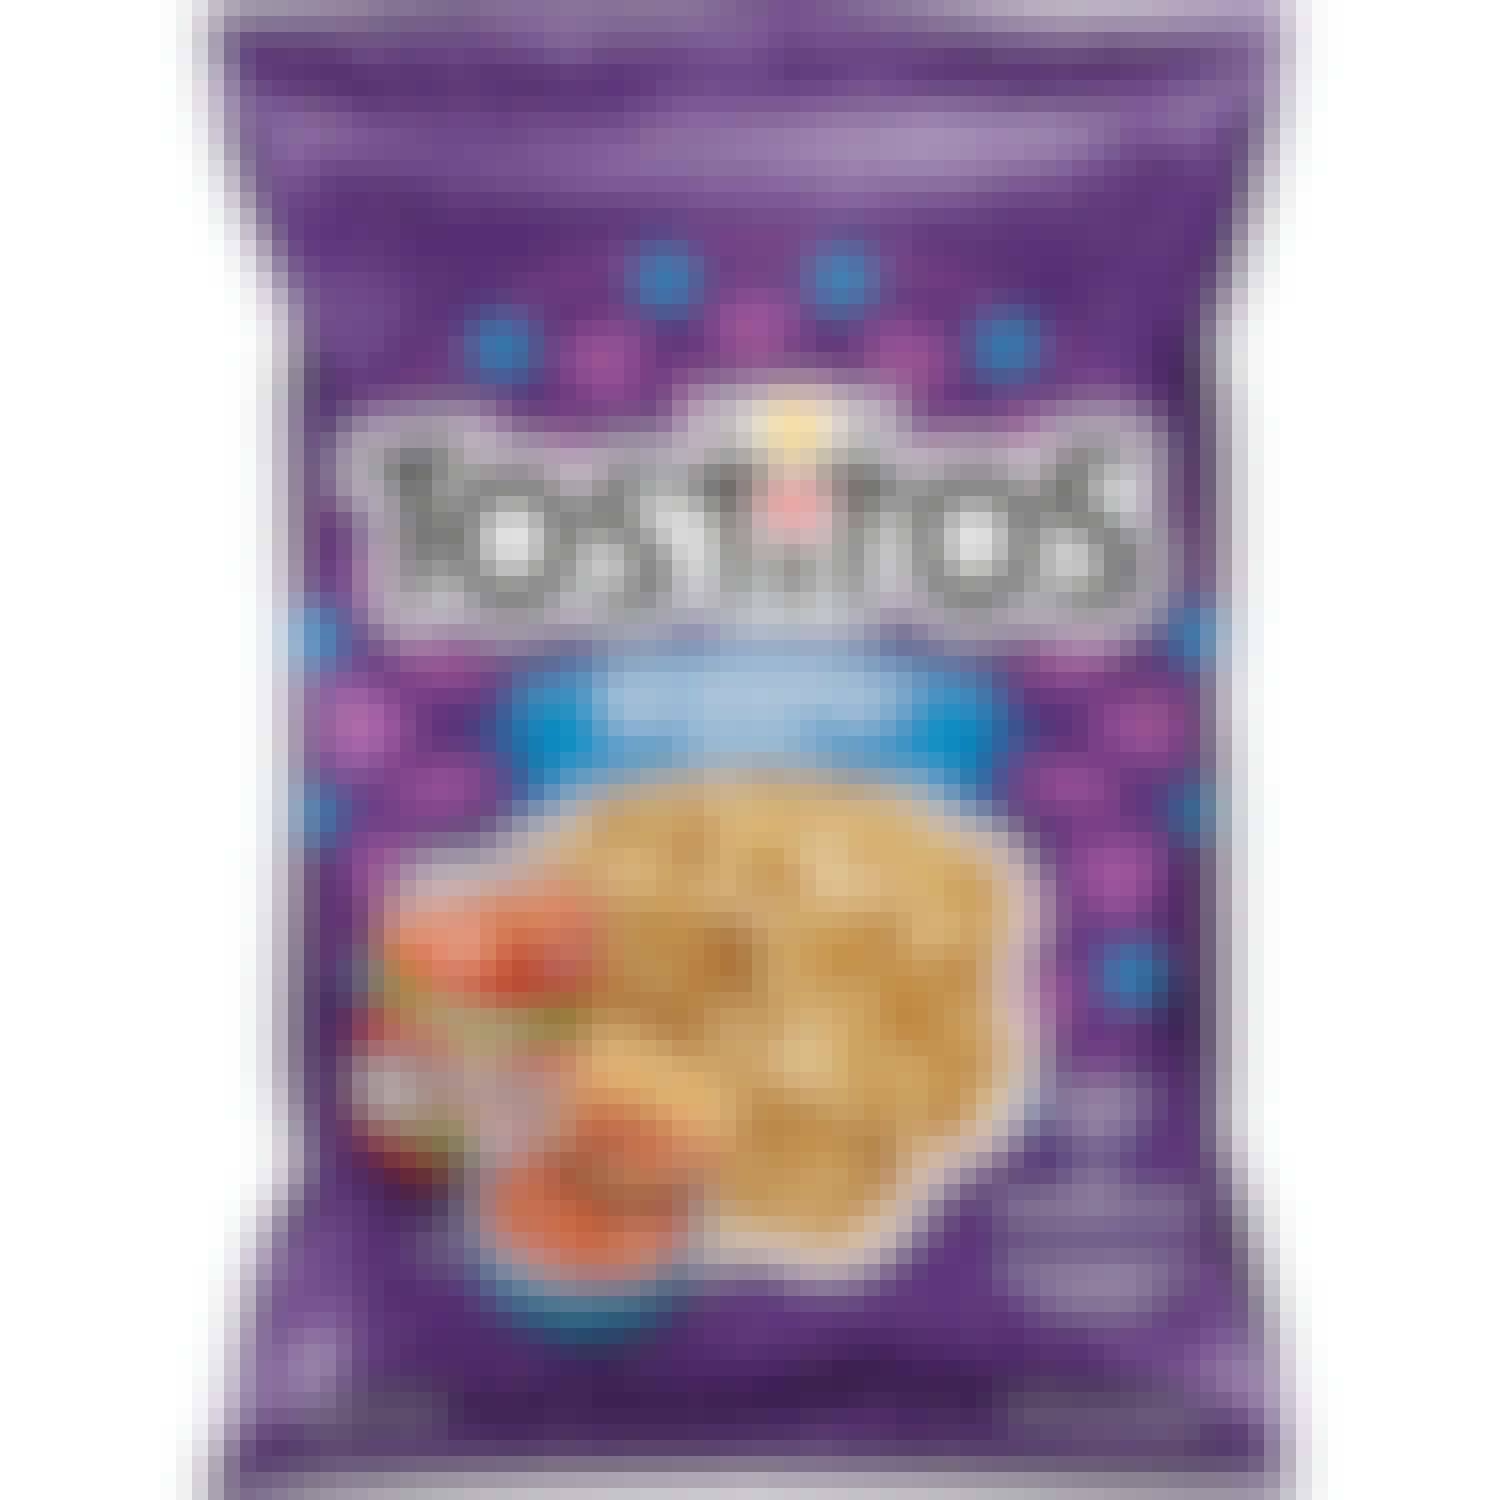 Lay's Tostitos Tortilla Chips Scoops